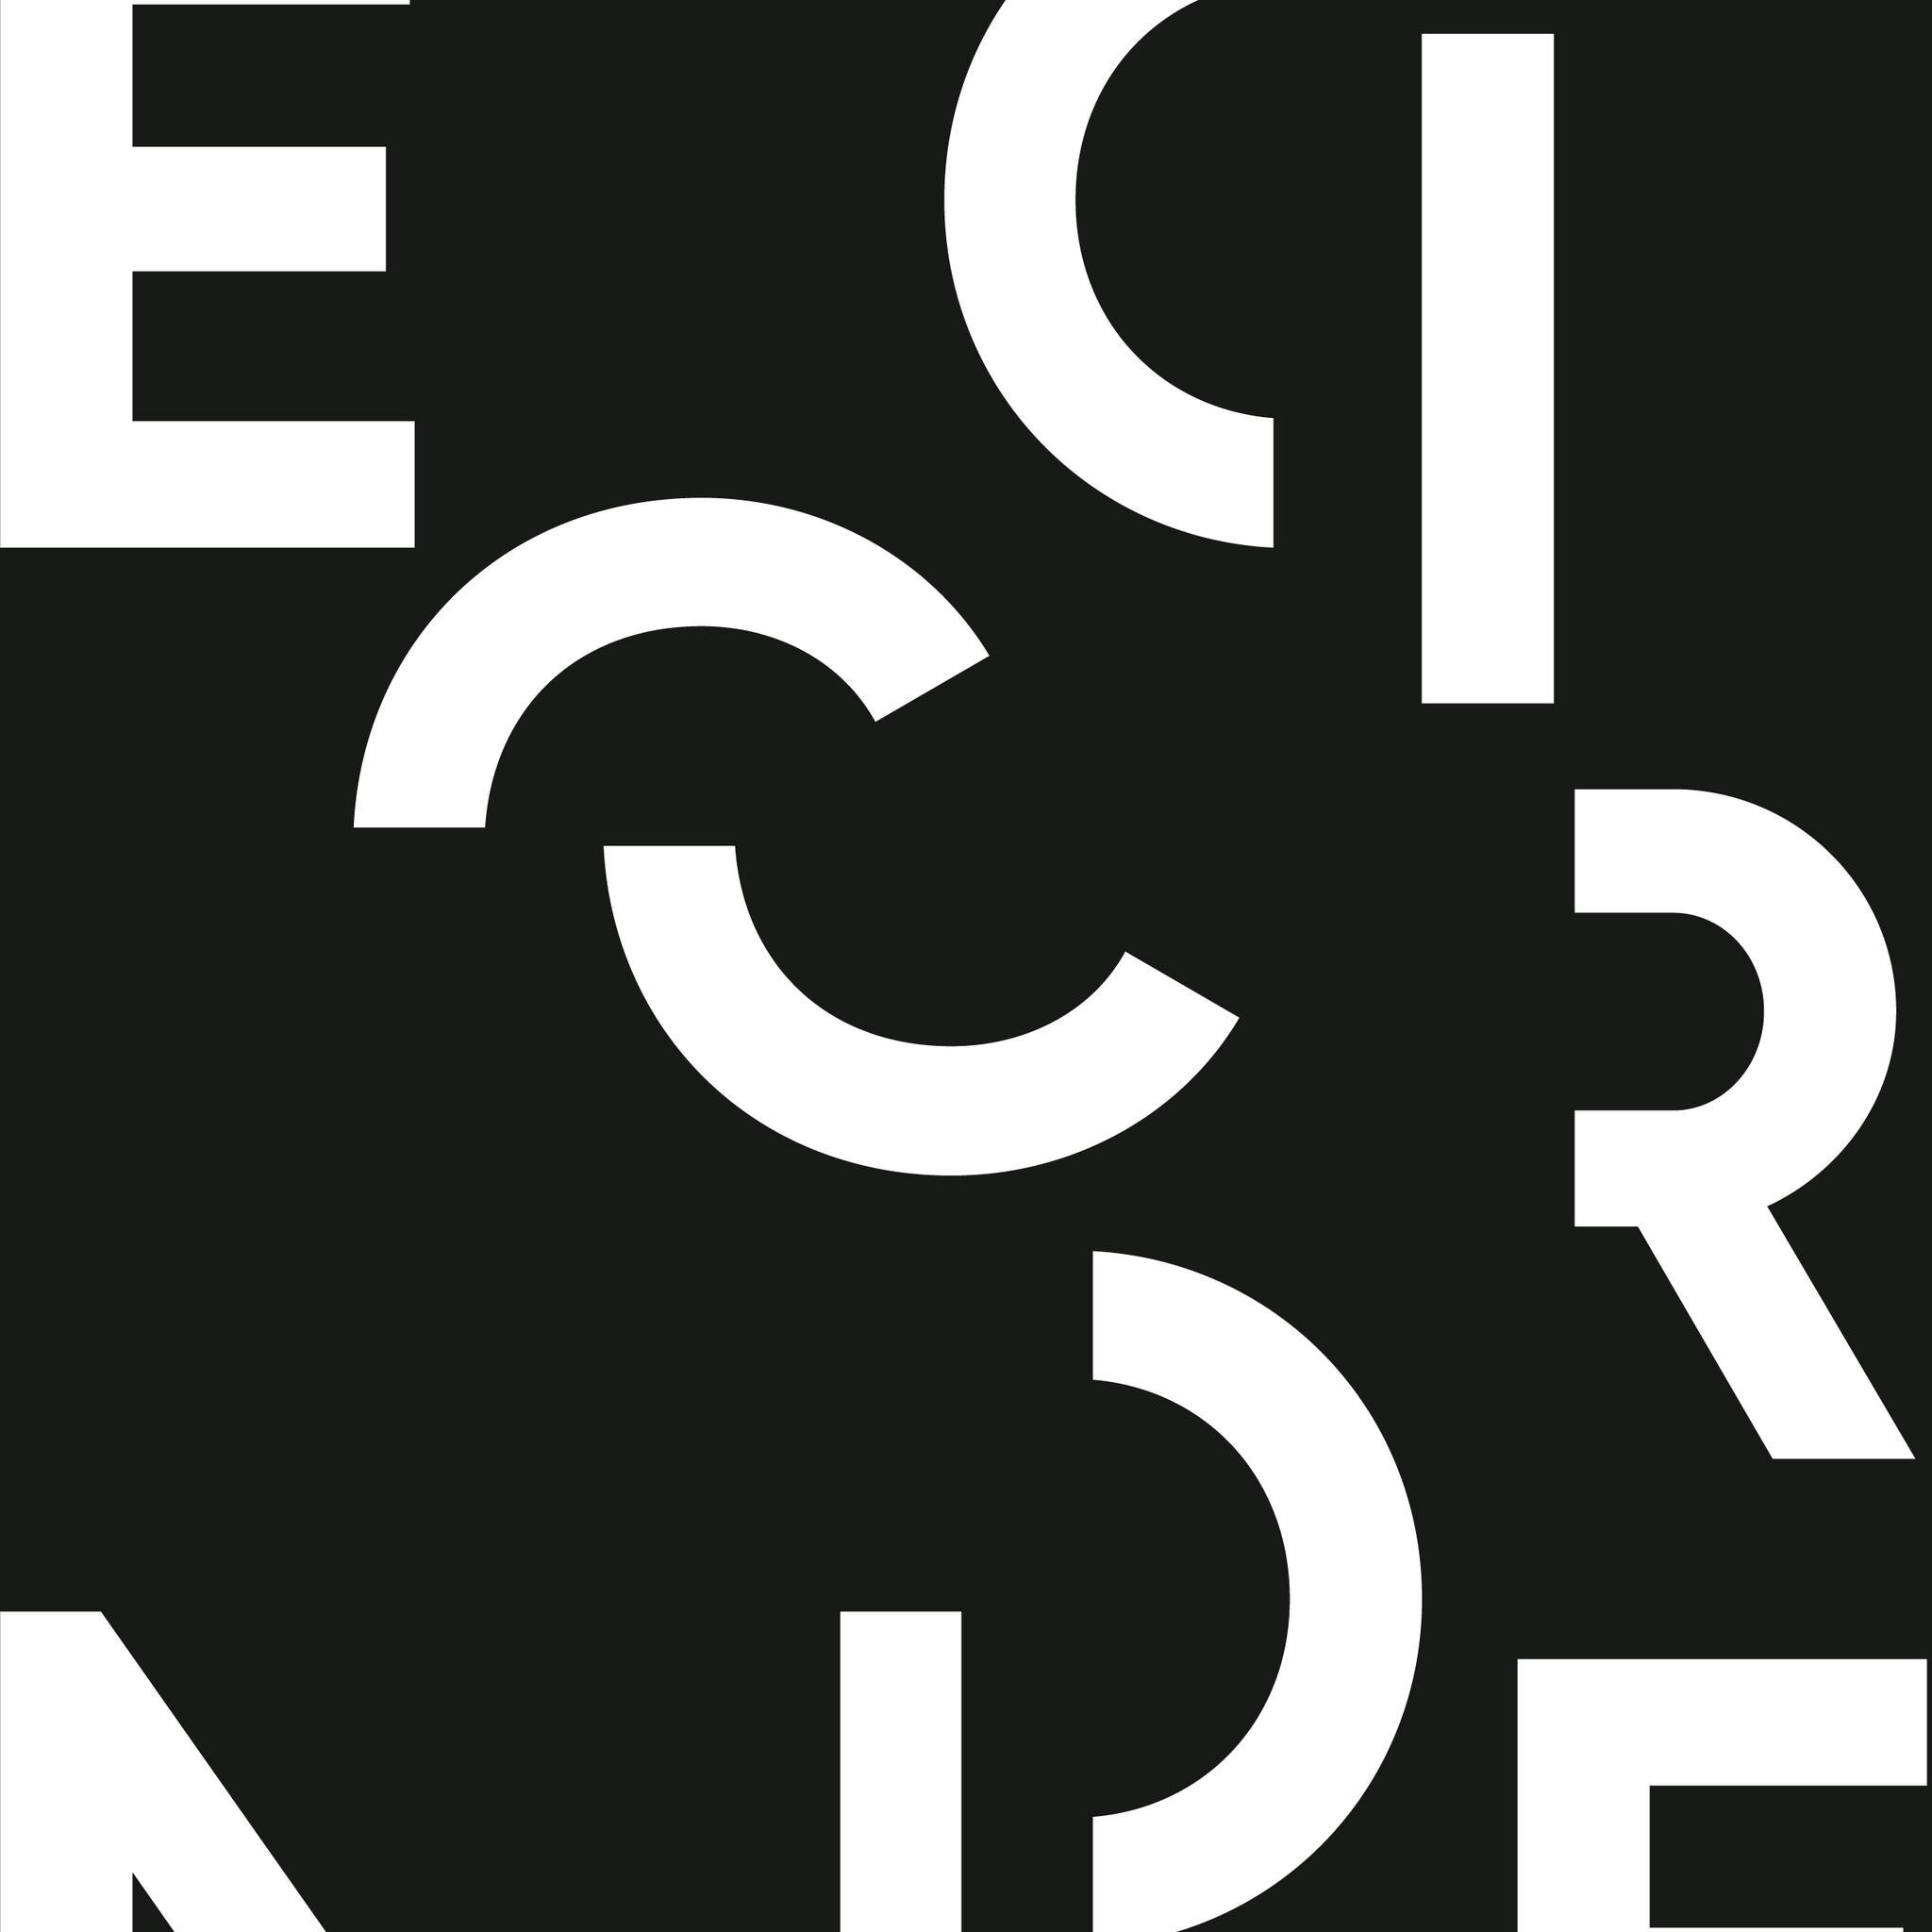 The identity for the @encore_academy is a custom logotype which is designed to &lsquo;break apart&rsquo;. The identity also gives a nod to street culture through its modified stencils - away from the typical visual connotations of a performing arts a